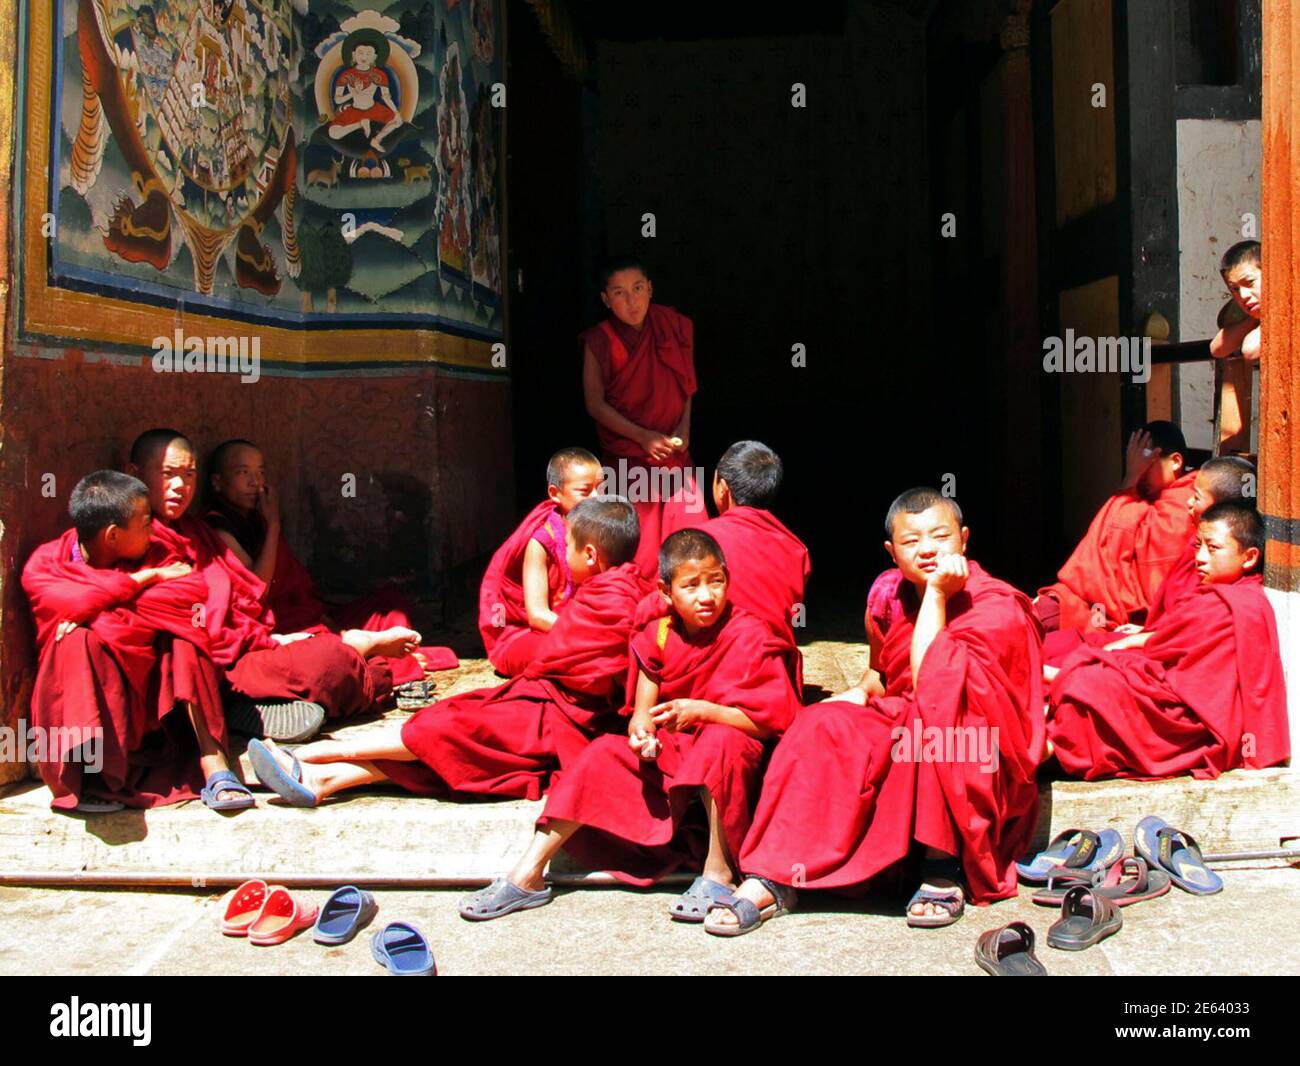 Young Buddhist monks take a break at Rinpung Dzong monastery in Paro Valley, Bhutan March 11, 2011. The Himalayan kingdom of Bhutan is becoming increasingly popular for well-heeled travelers keen to explore this remote and unspoiled Buddhist Shangri La. Surrounded by mountains and flanked by India and Tibet, this tiny country has only been opened to tourism for a few decades and its traditional way of life remains miraculously preserved despite the growing prevalence of mobile phones and cable television. Paro Dzong (Rinpung Dzong) is an enormous fortress-monastery built in 1646 which featured Stock Photo